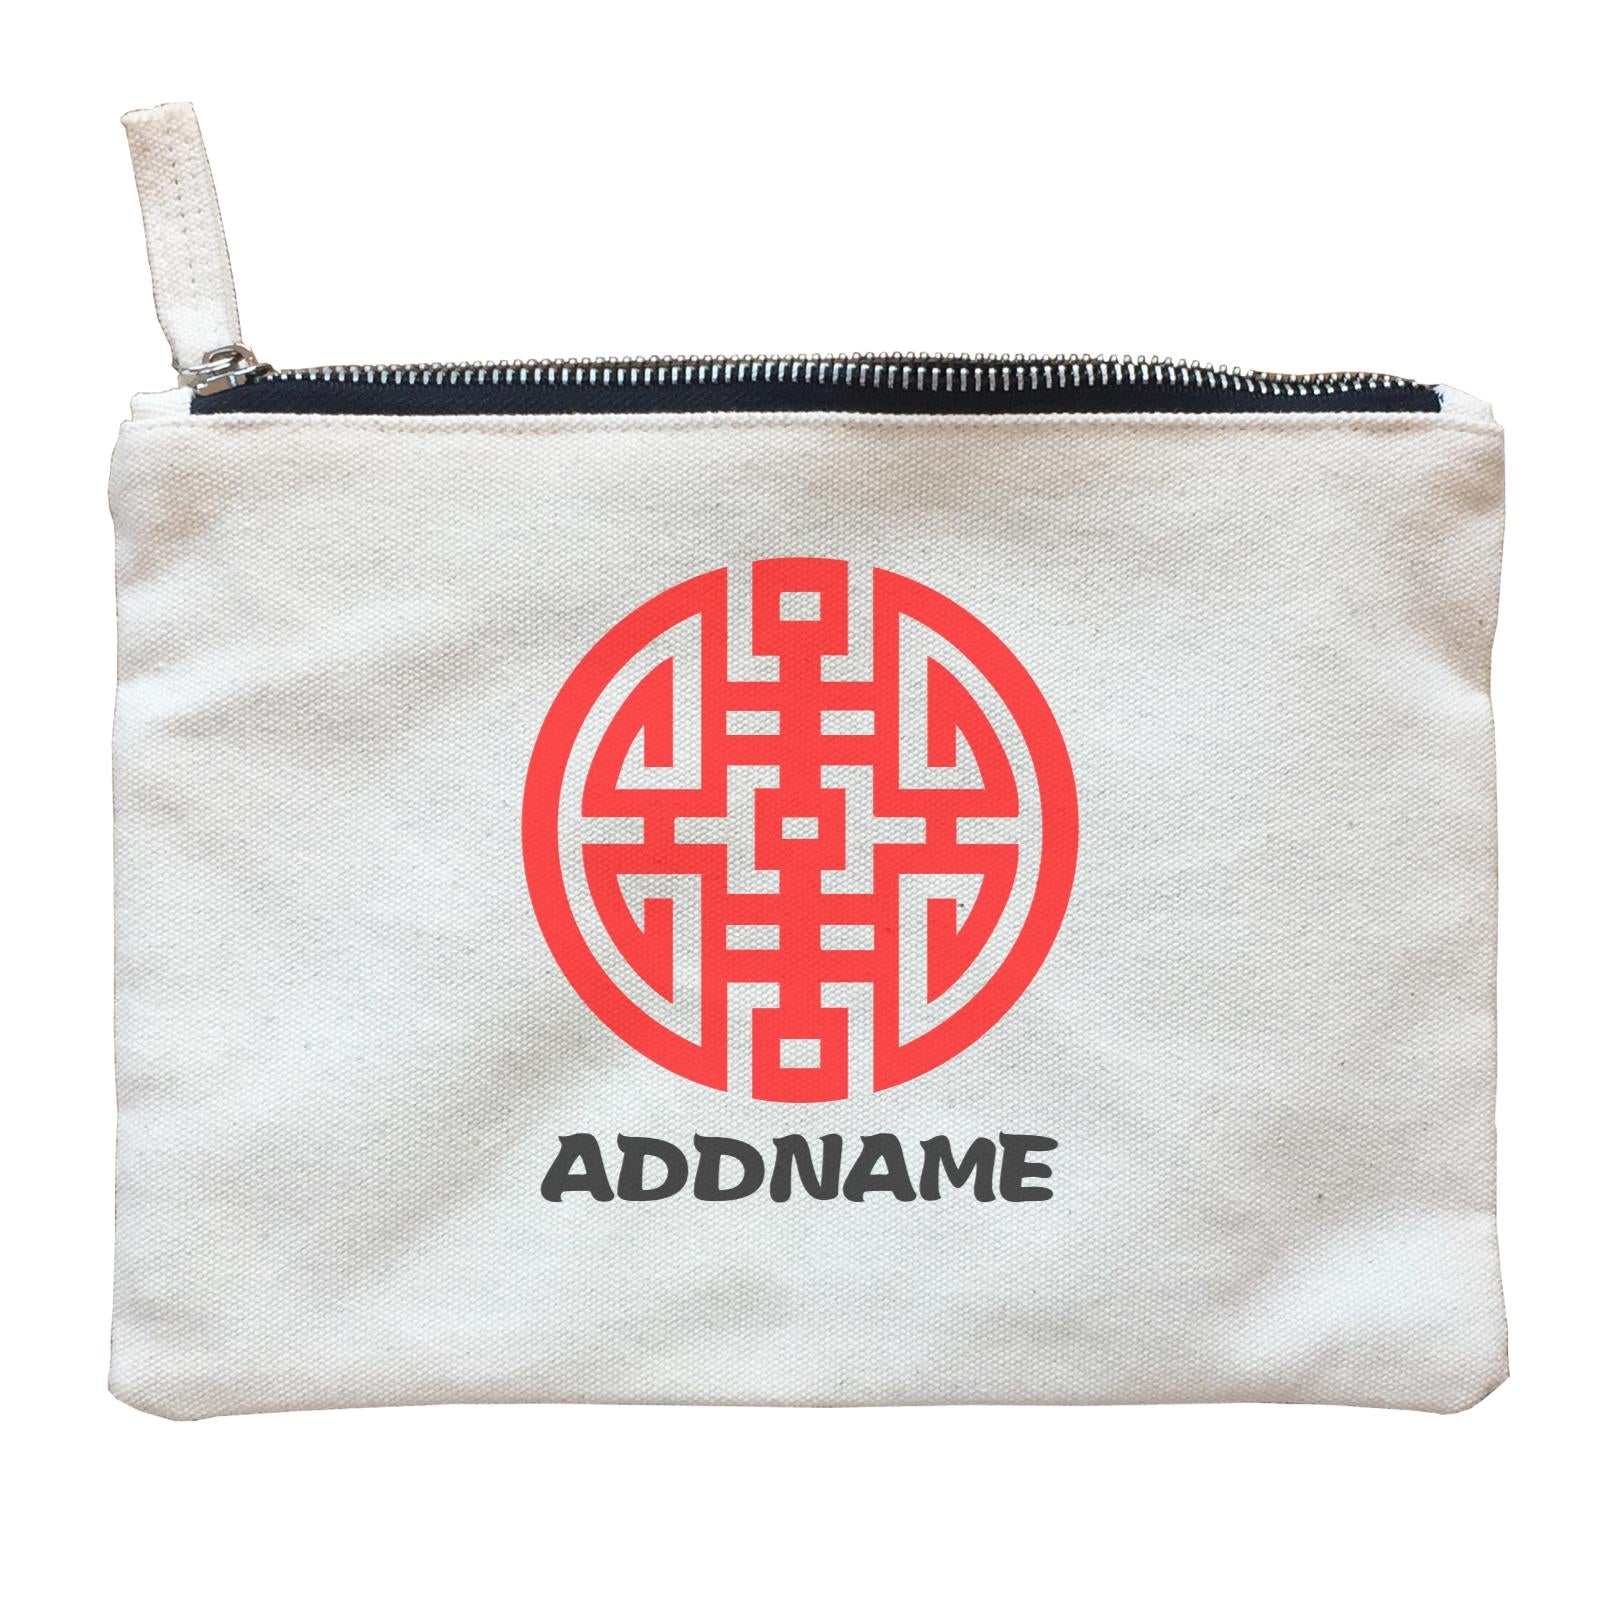 Chinese New Year Prosperity Emblem with Name Stamp Accessories Zipper Pouch